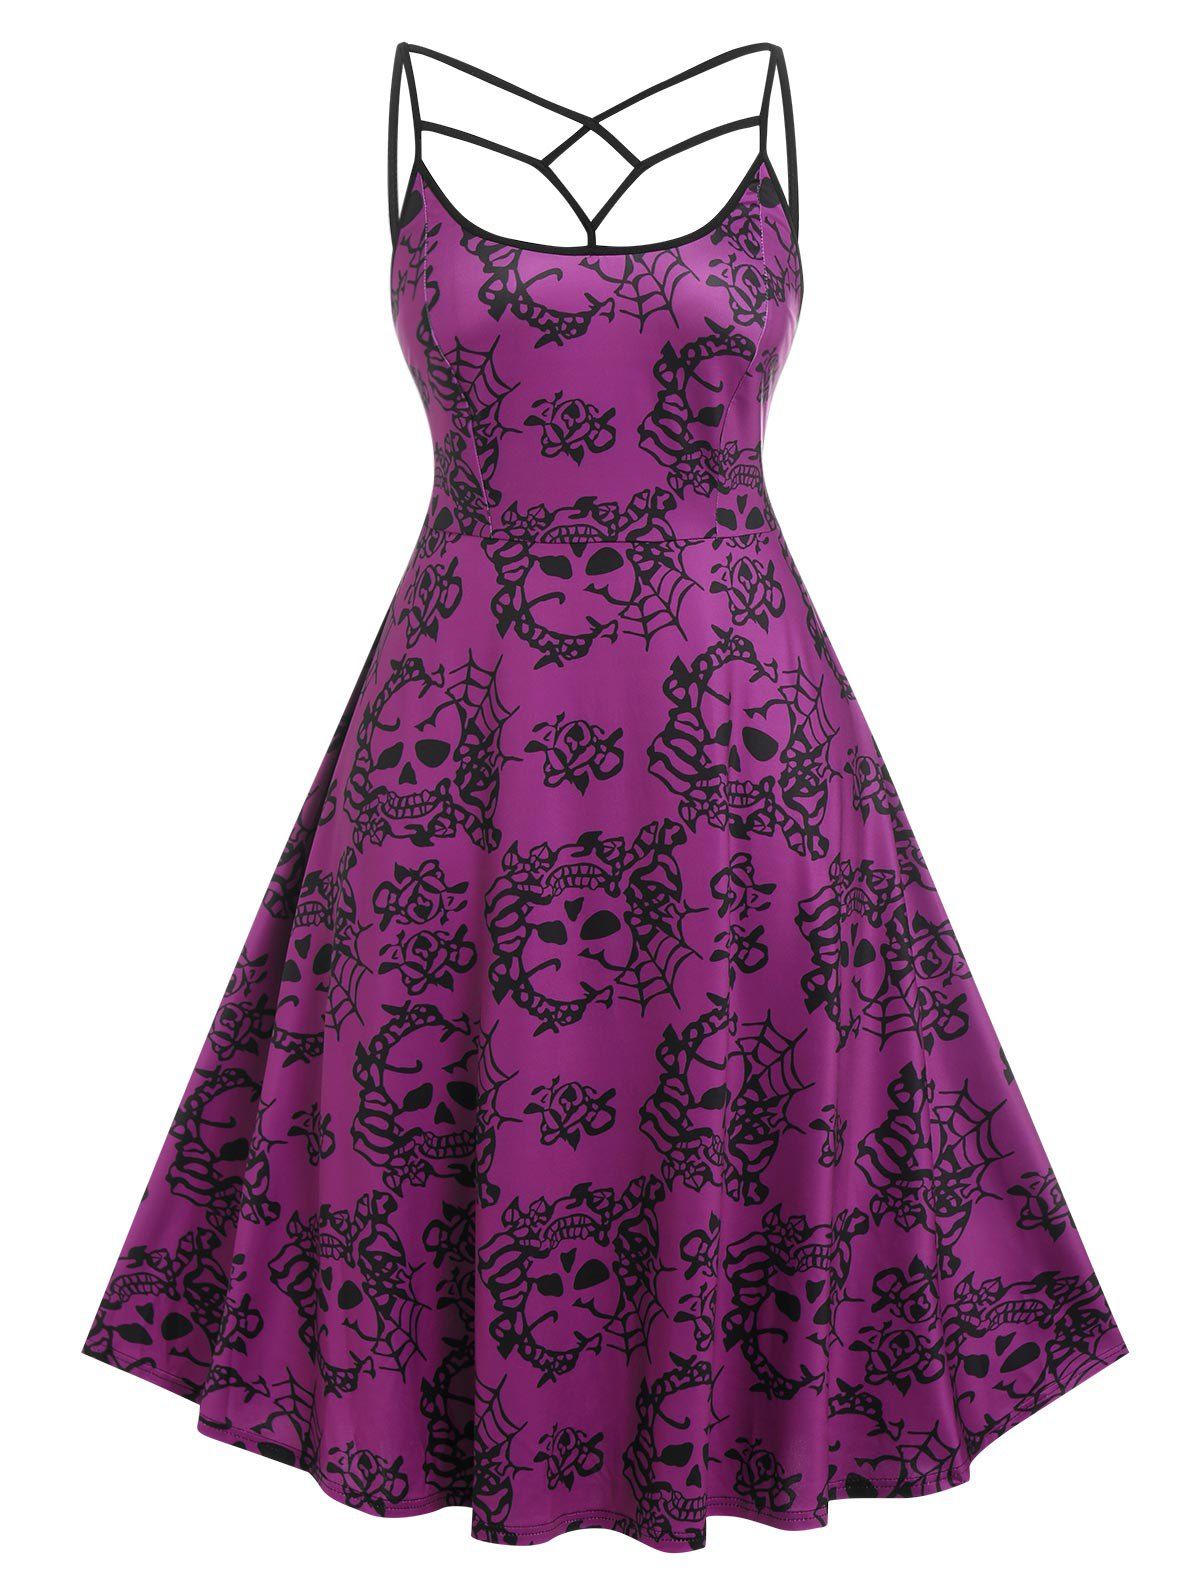 New Plus Size Skull Floral Print A Line Gothic Dress  